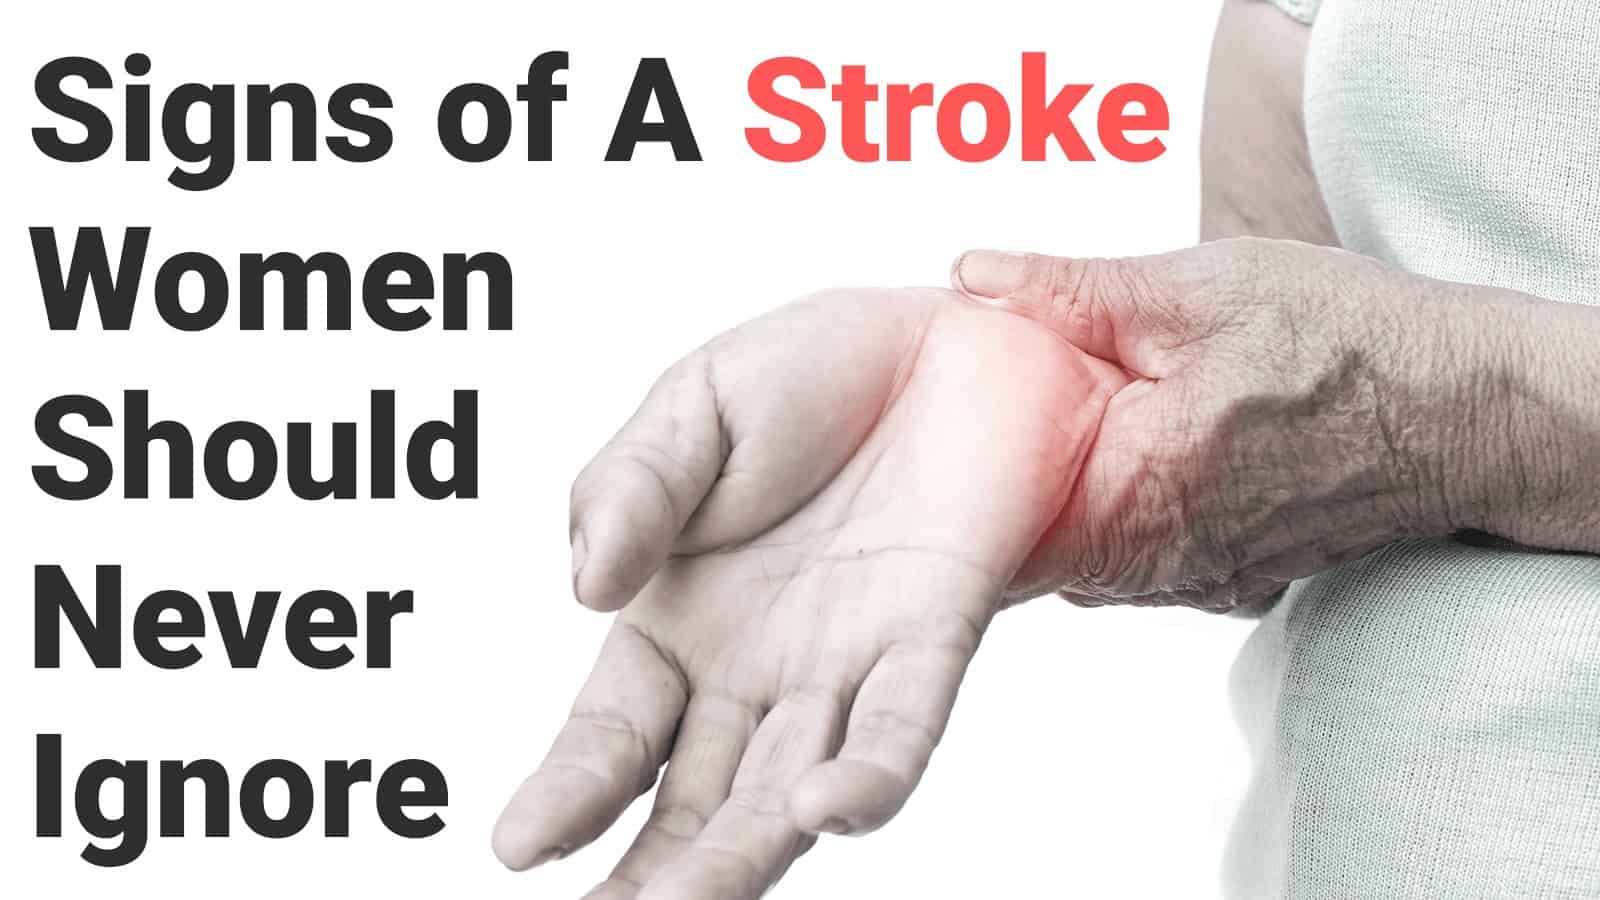 Signs of A Stroke Women Should Never Ignore